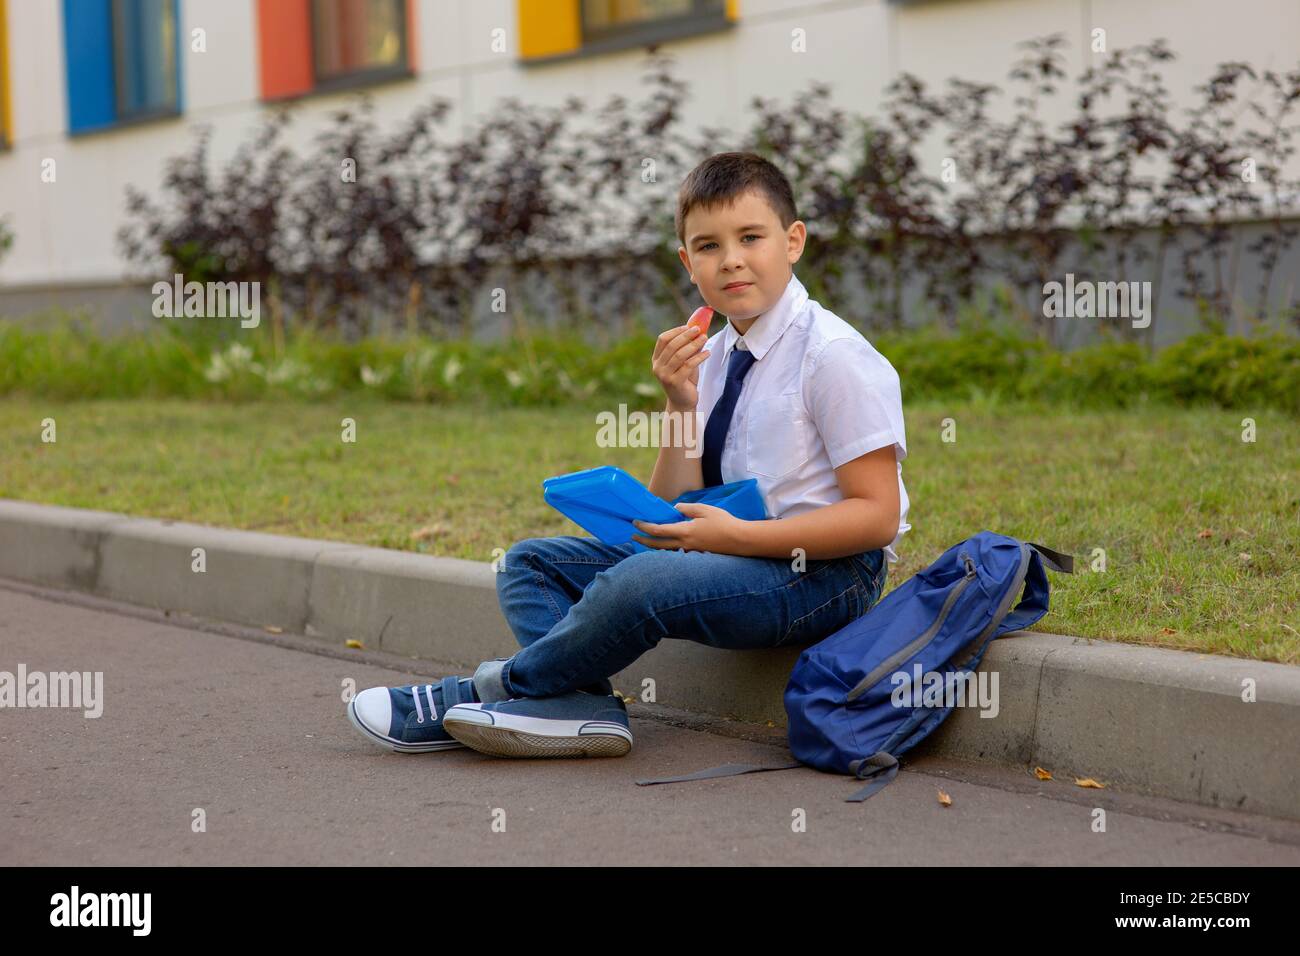 schoolboy in a white shirt with a blue tie, holds a blue lunch box and a slice of apple, looks at the camera Stock Photo